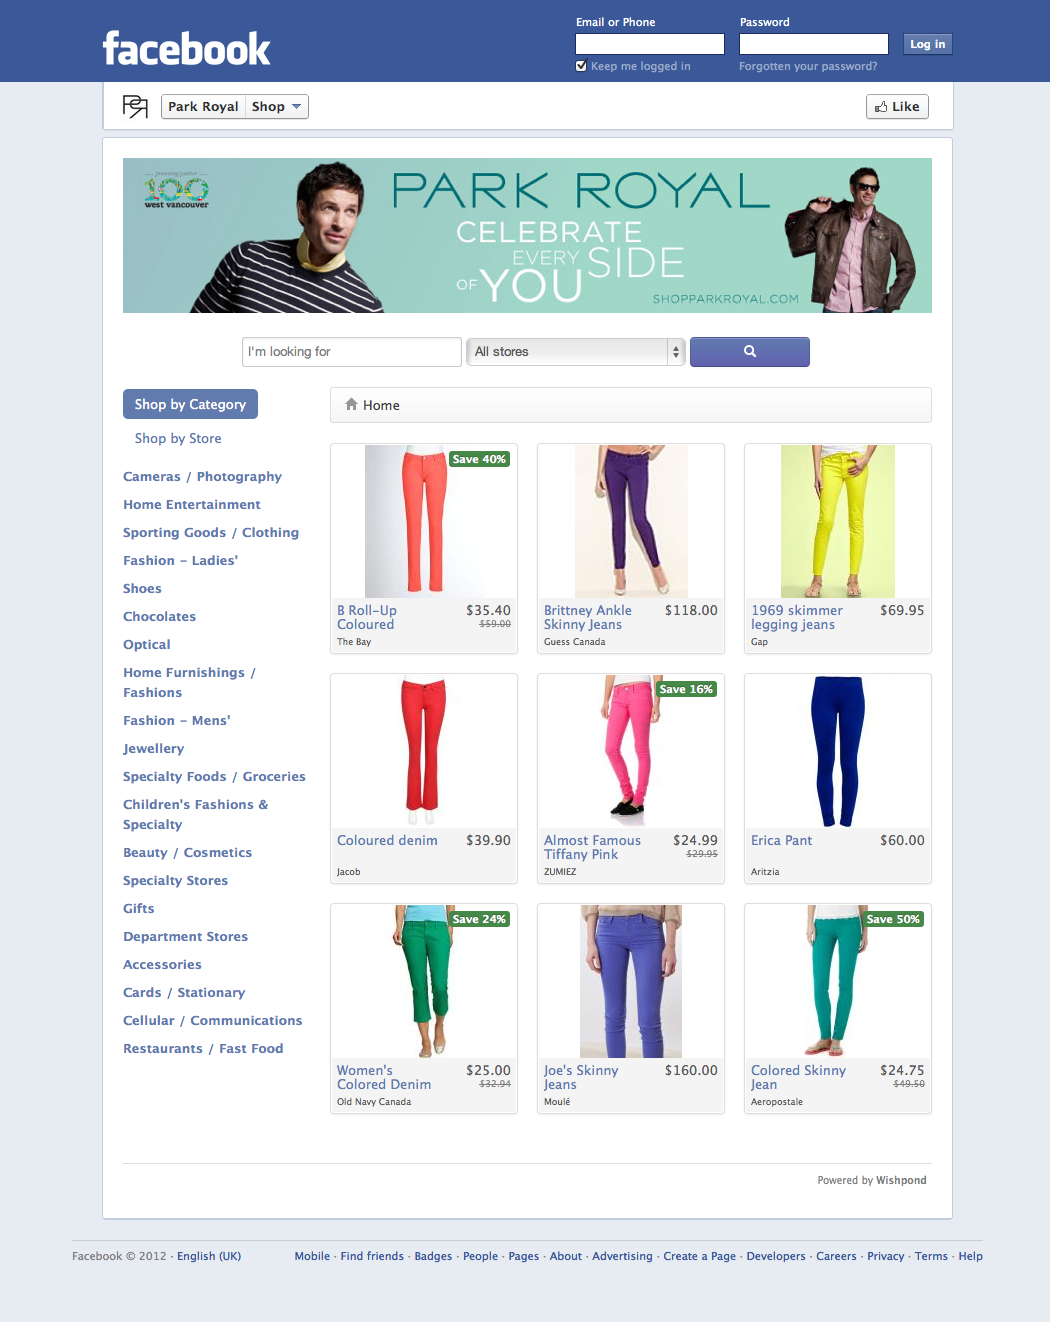 Park Royal experience in Facebook, powered by Wishpond Mall360